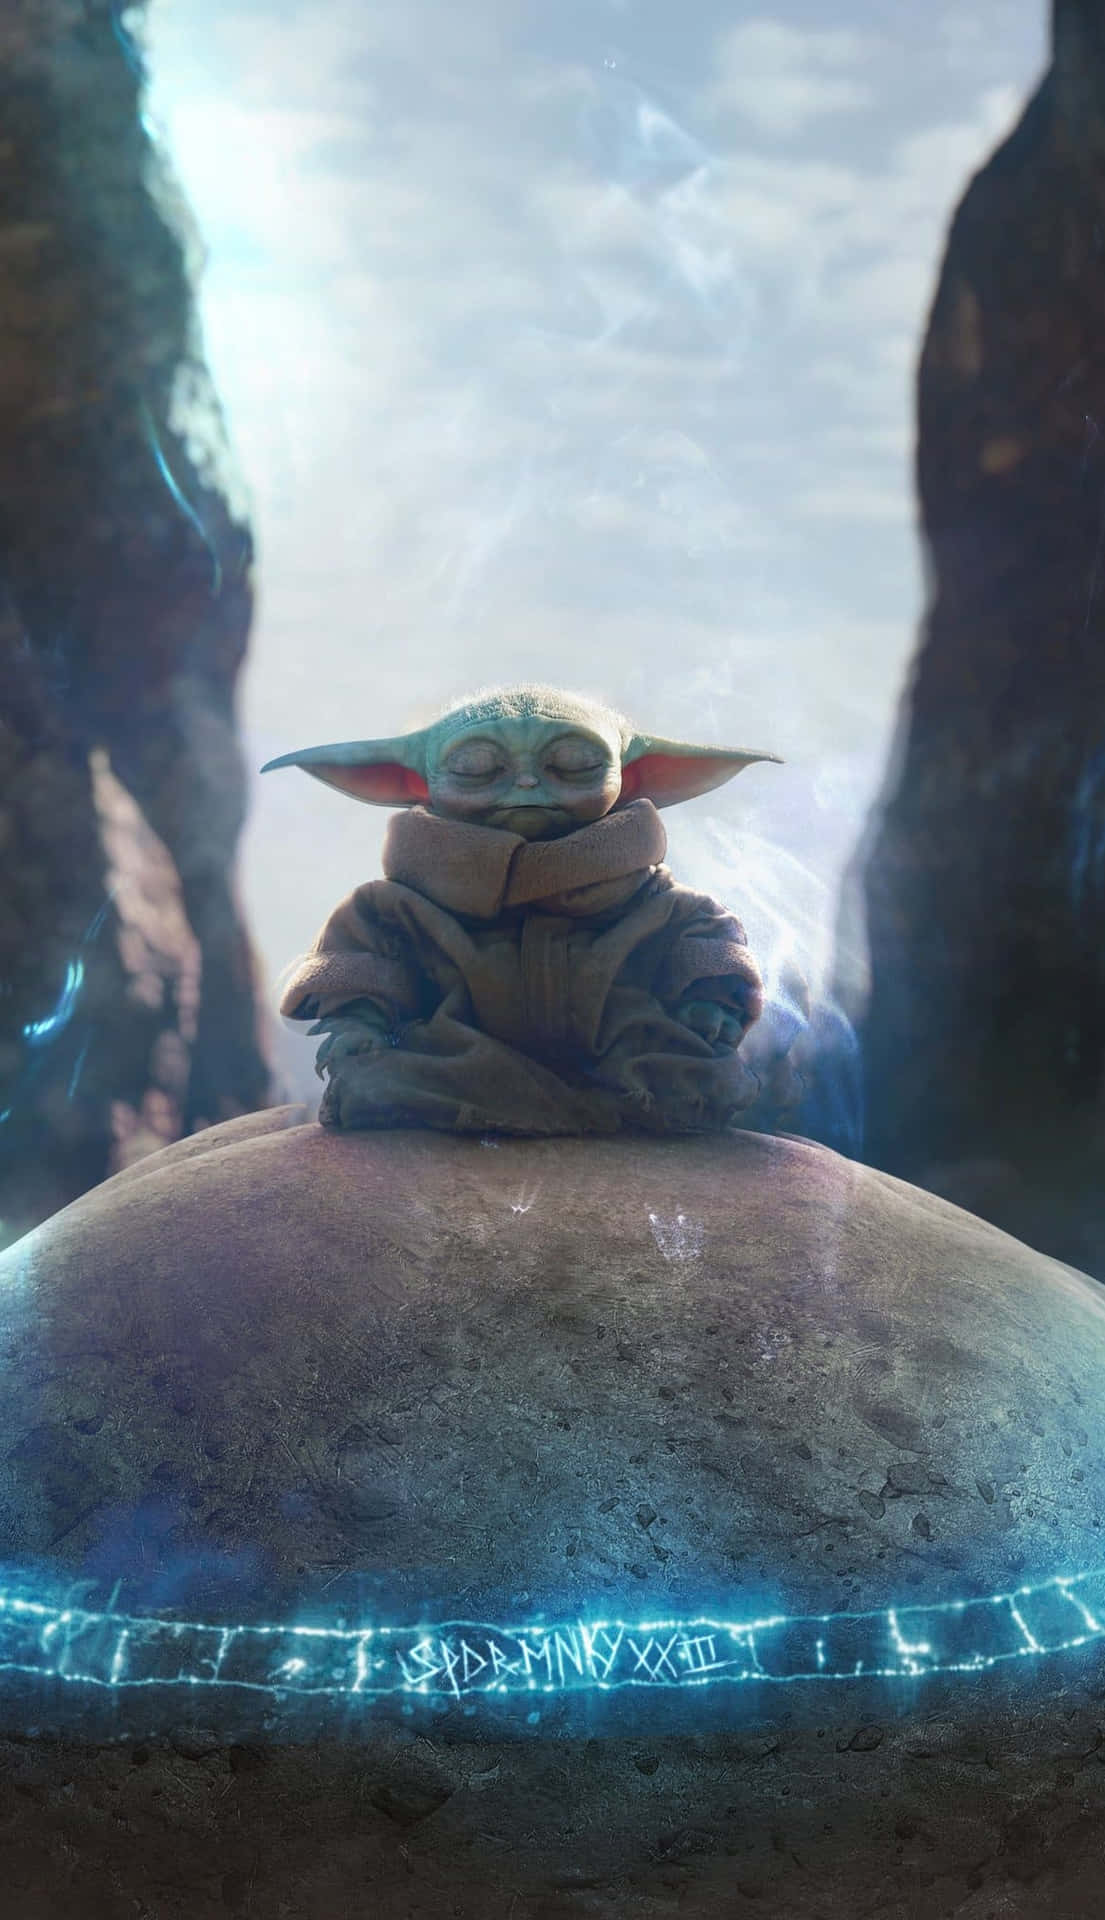 The Adorable Baby Yoda Captivates With His Innocent Eyes Against A Mystical Space Backdrop.